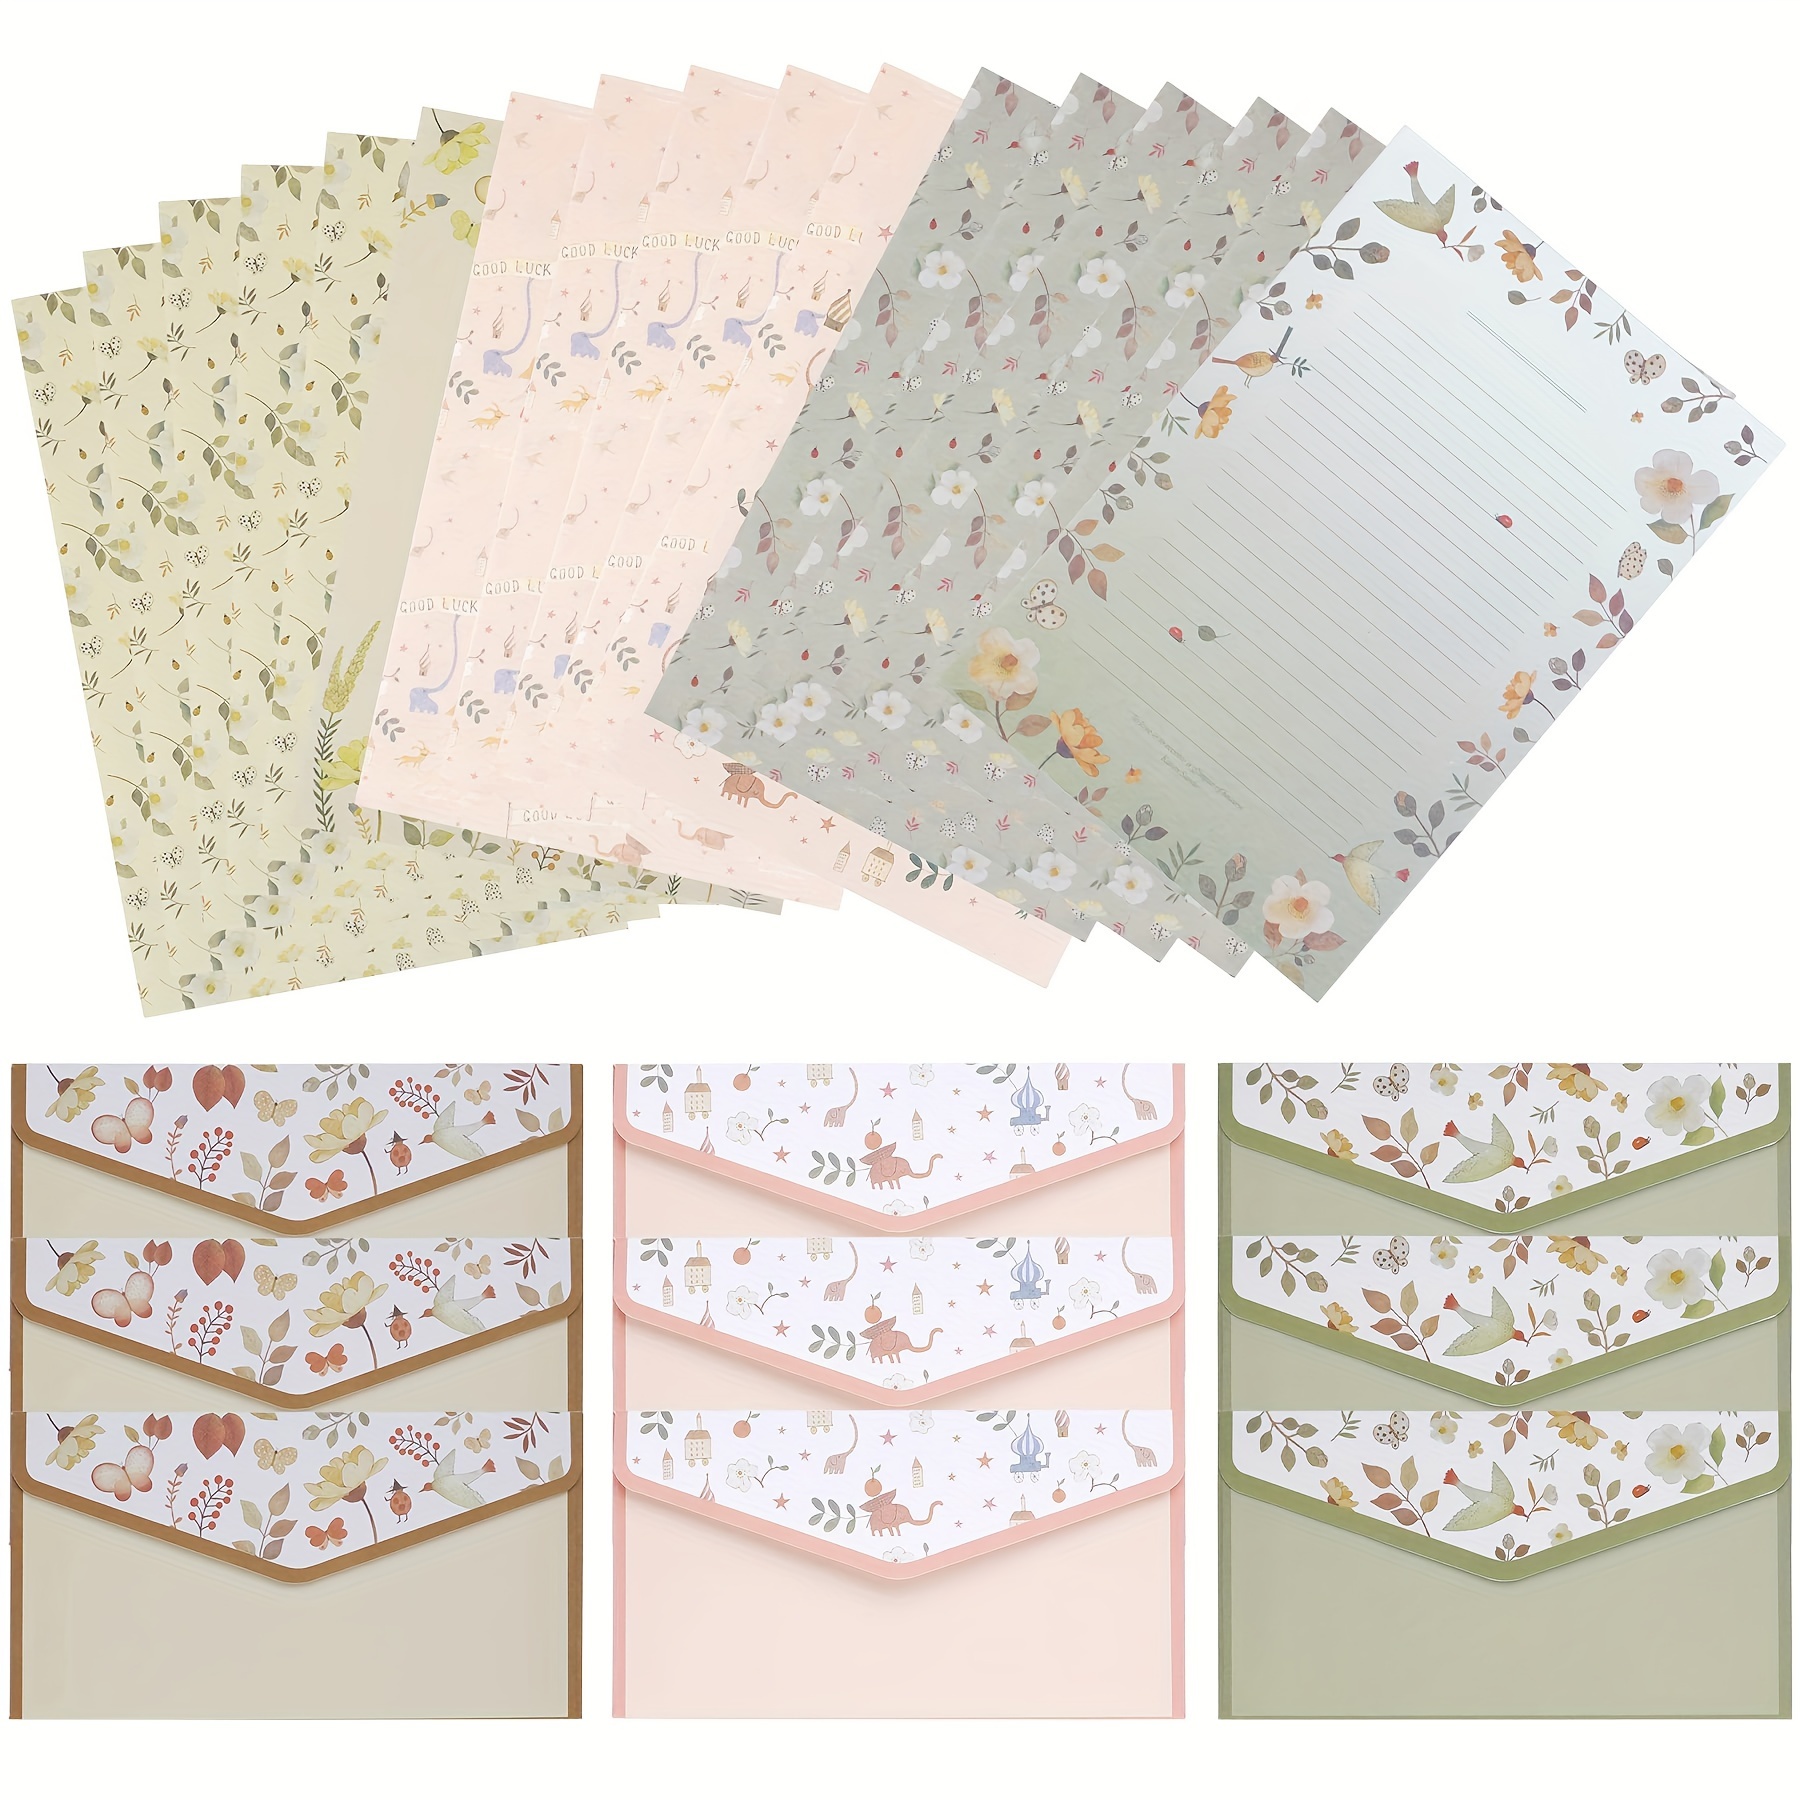 

27-piece Envelope Stationery Writing Paper Set 3 Styles Cute Retro Floral Letter Writing And Stationery Paper Envelopes (18 Sheets Of Letter Paper 9 Envelopes)